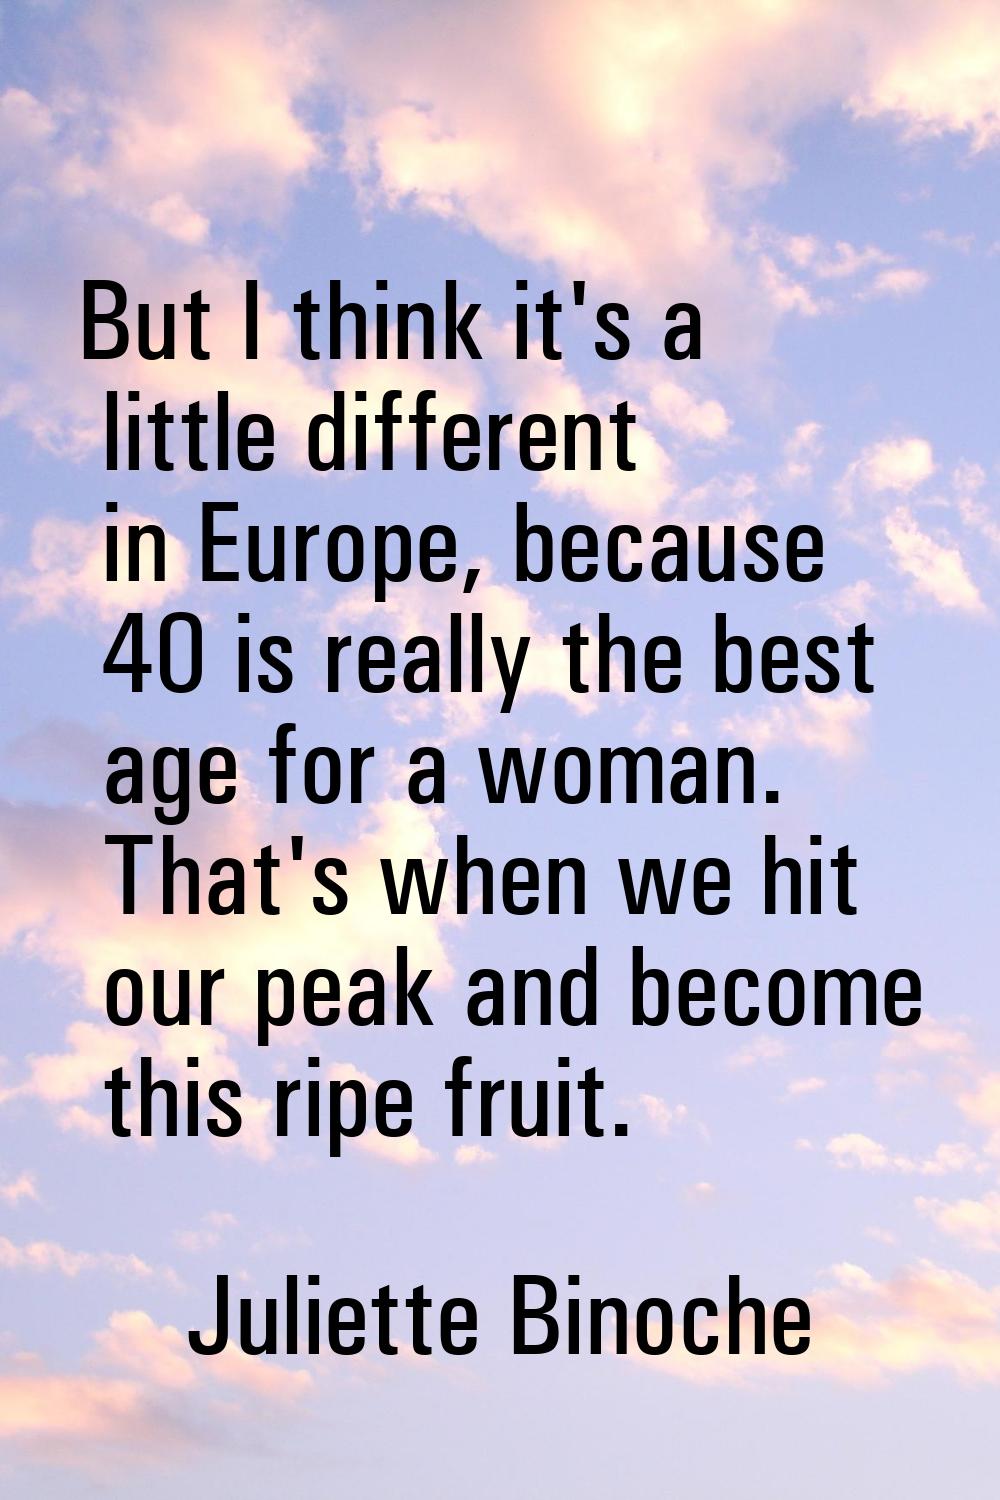 But I think it's a little different in Europe, because 40 is really the best age for a woman. That'